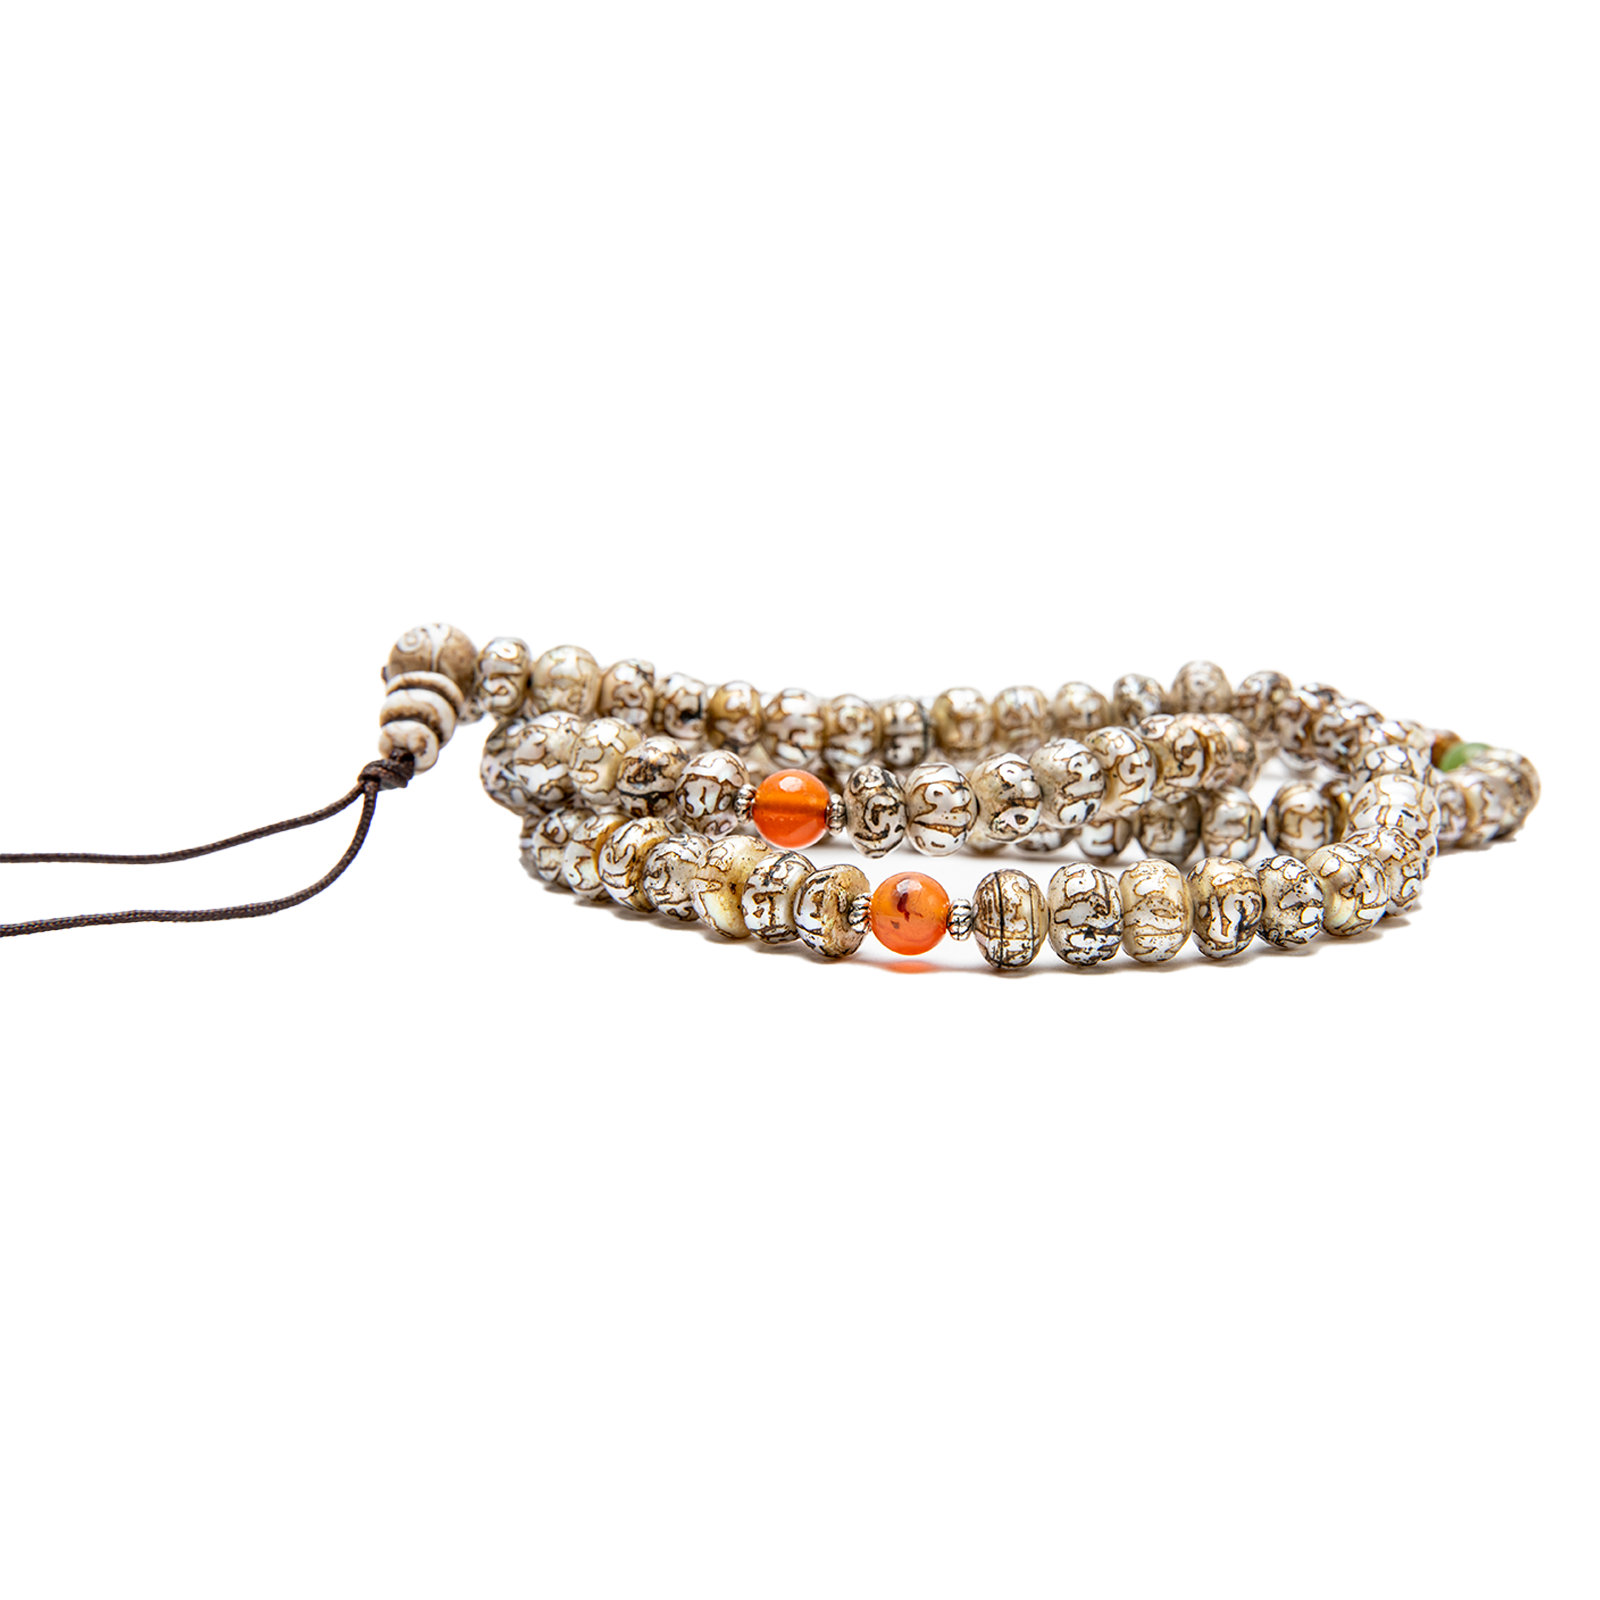 Close-up of the Fresh Water Pearl Mala on a solid white backdrop. The mala rests flat at nearly eye-level, with the carnelian beads on display.